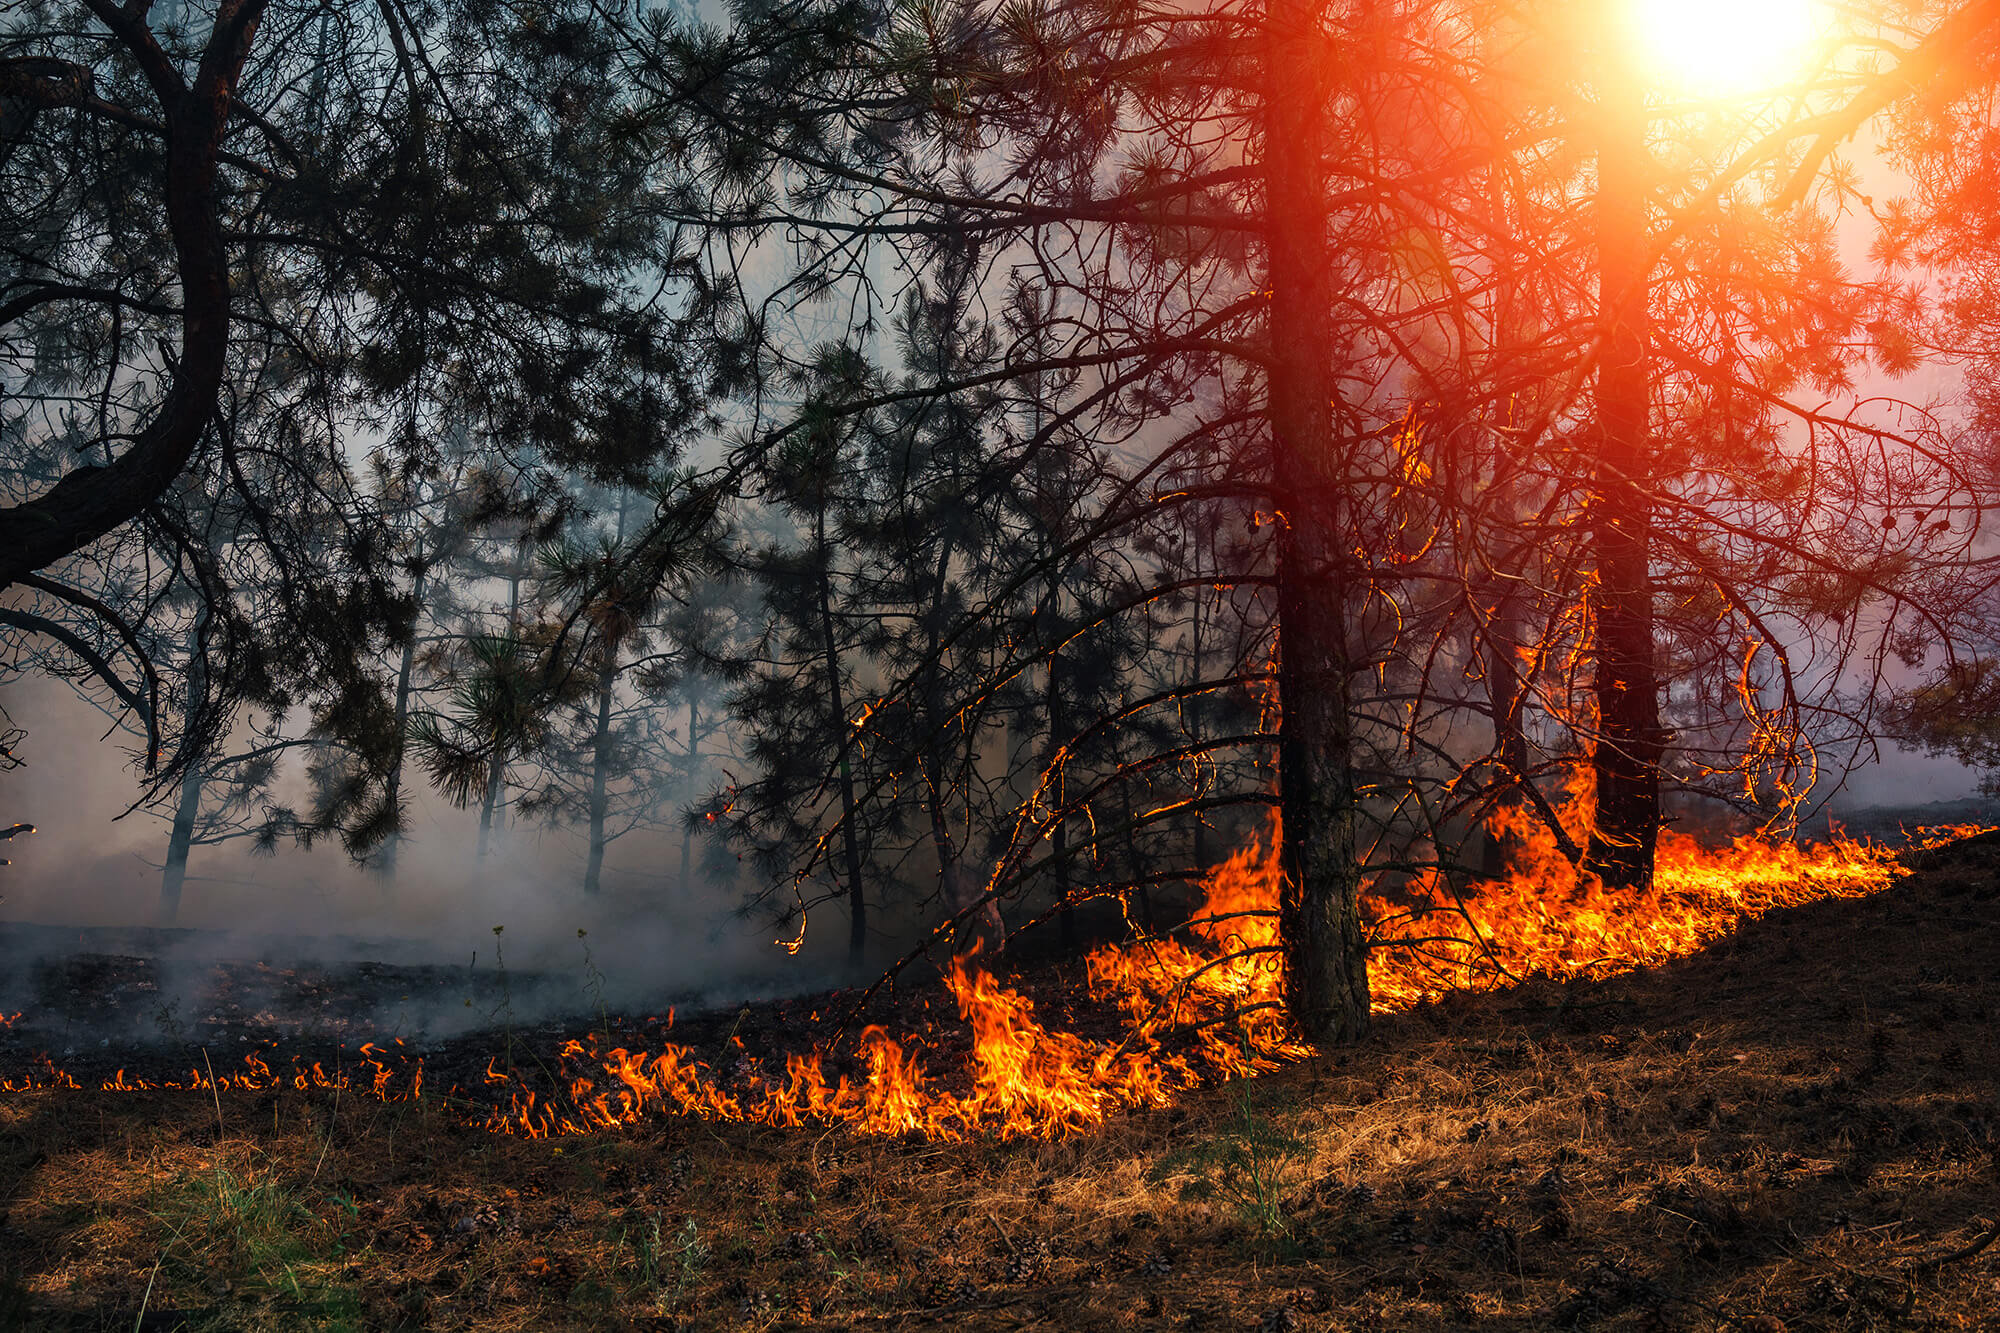 Wildfire burning a meadow and evergreen trees, with sunlight in the background.